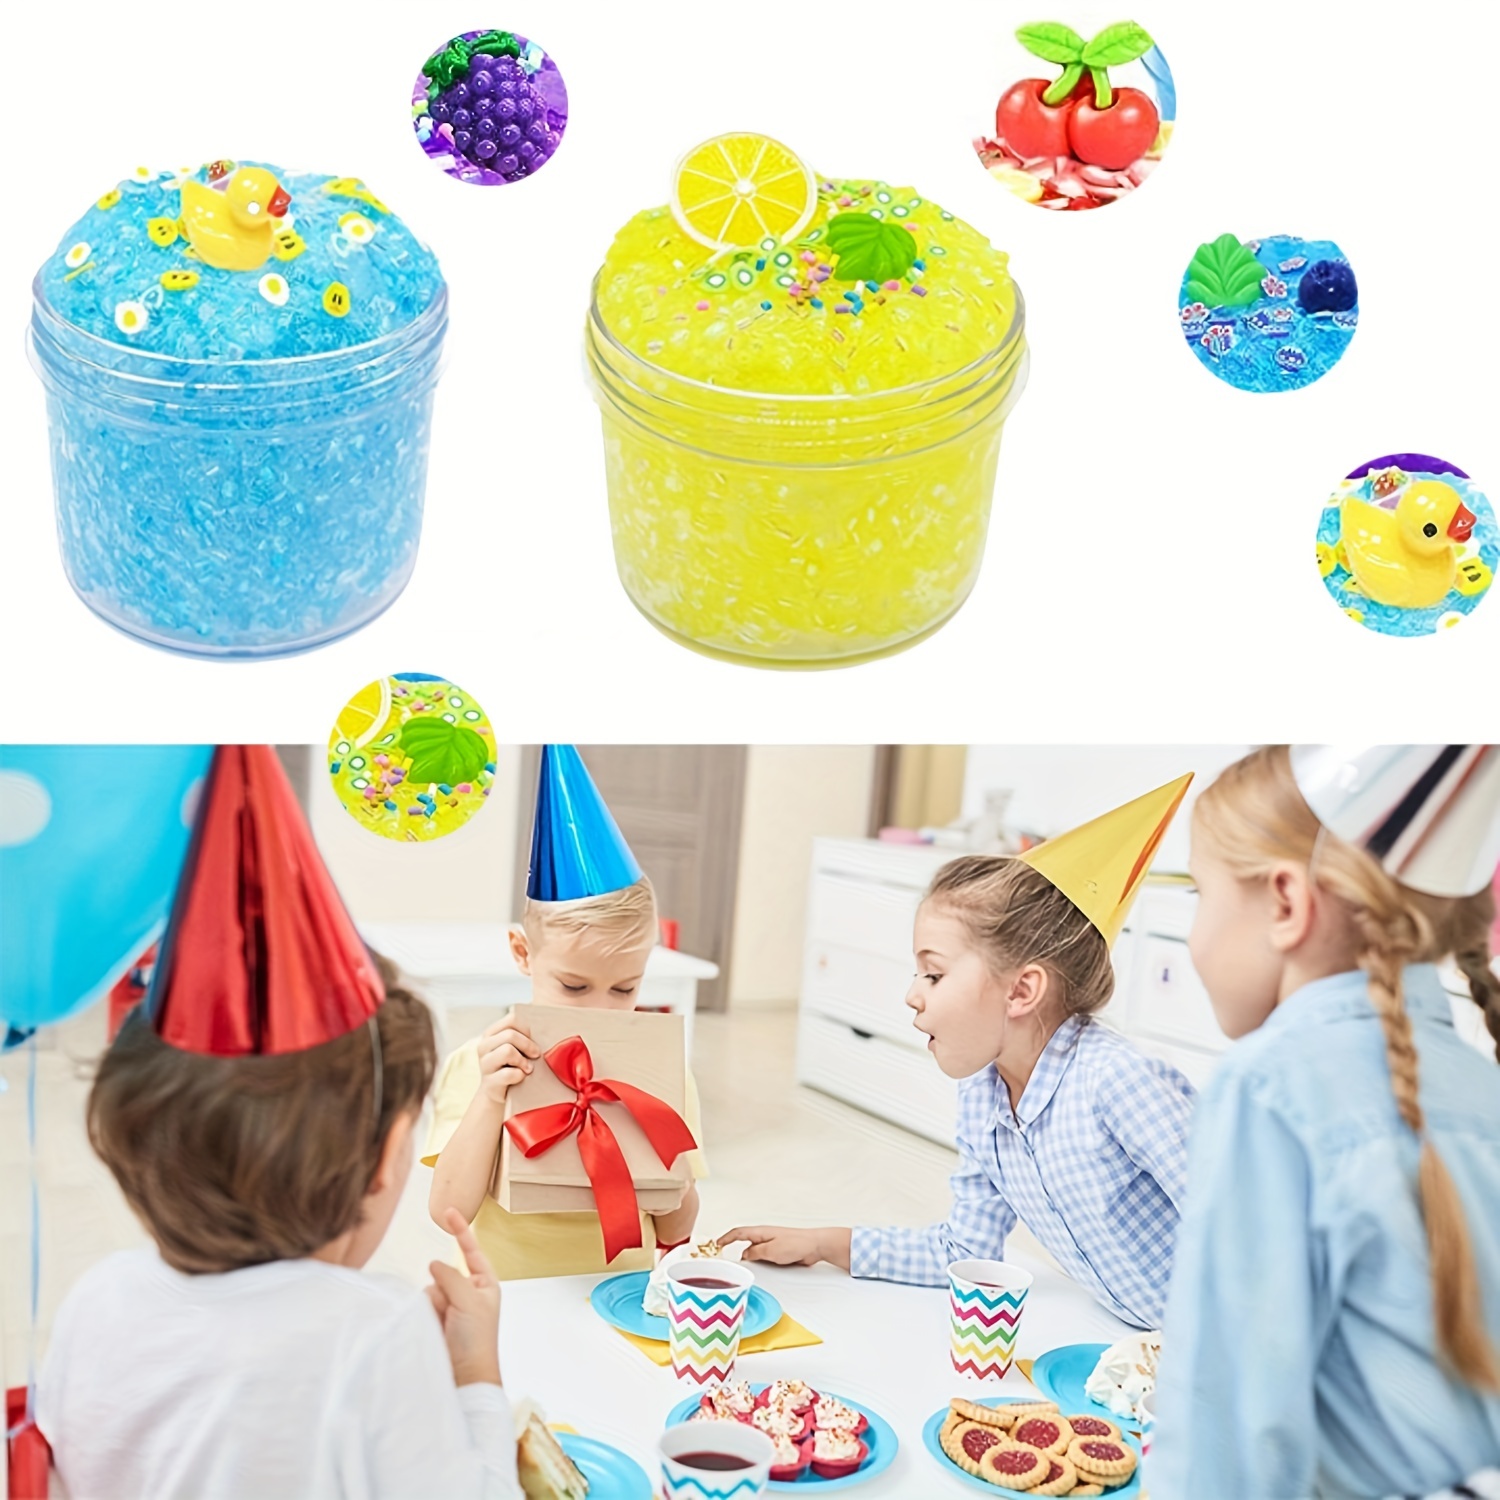 2 Packs Jelly Cube Crunchy Slime Kit,Non Sticky,Super Soft Sludge  Toy,Birthday Gifts for Kids,DIY Crystal Glue Boba Slime Party Favor for  Girls 